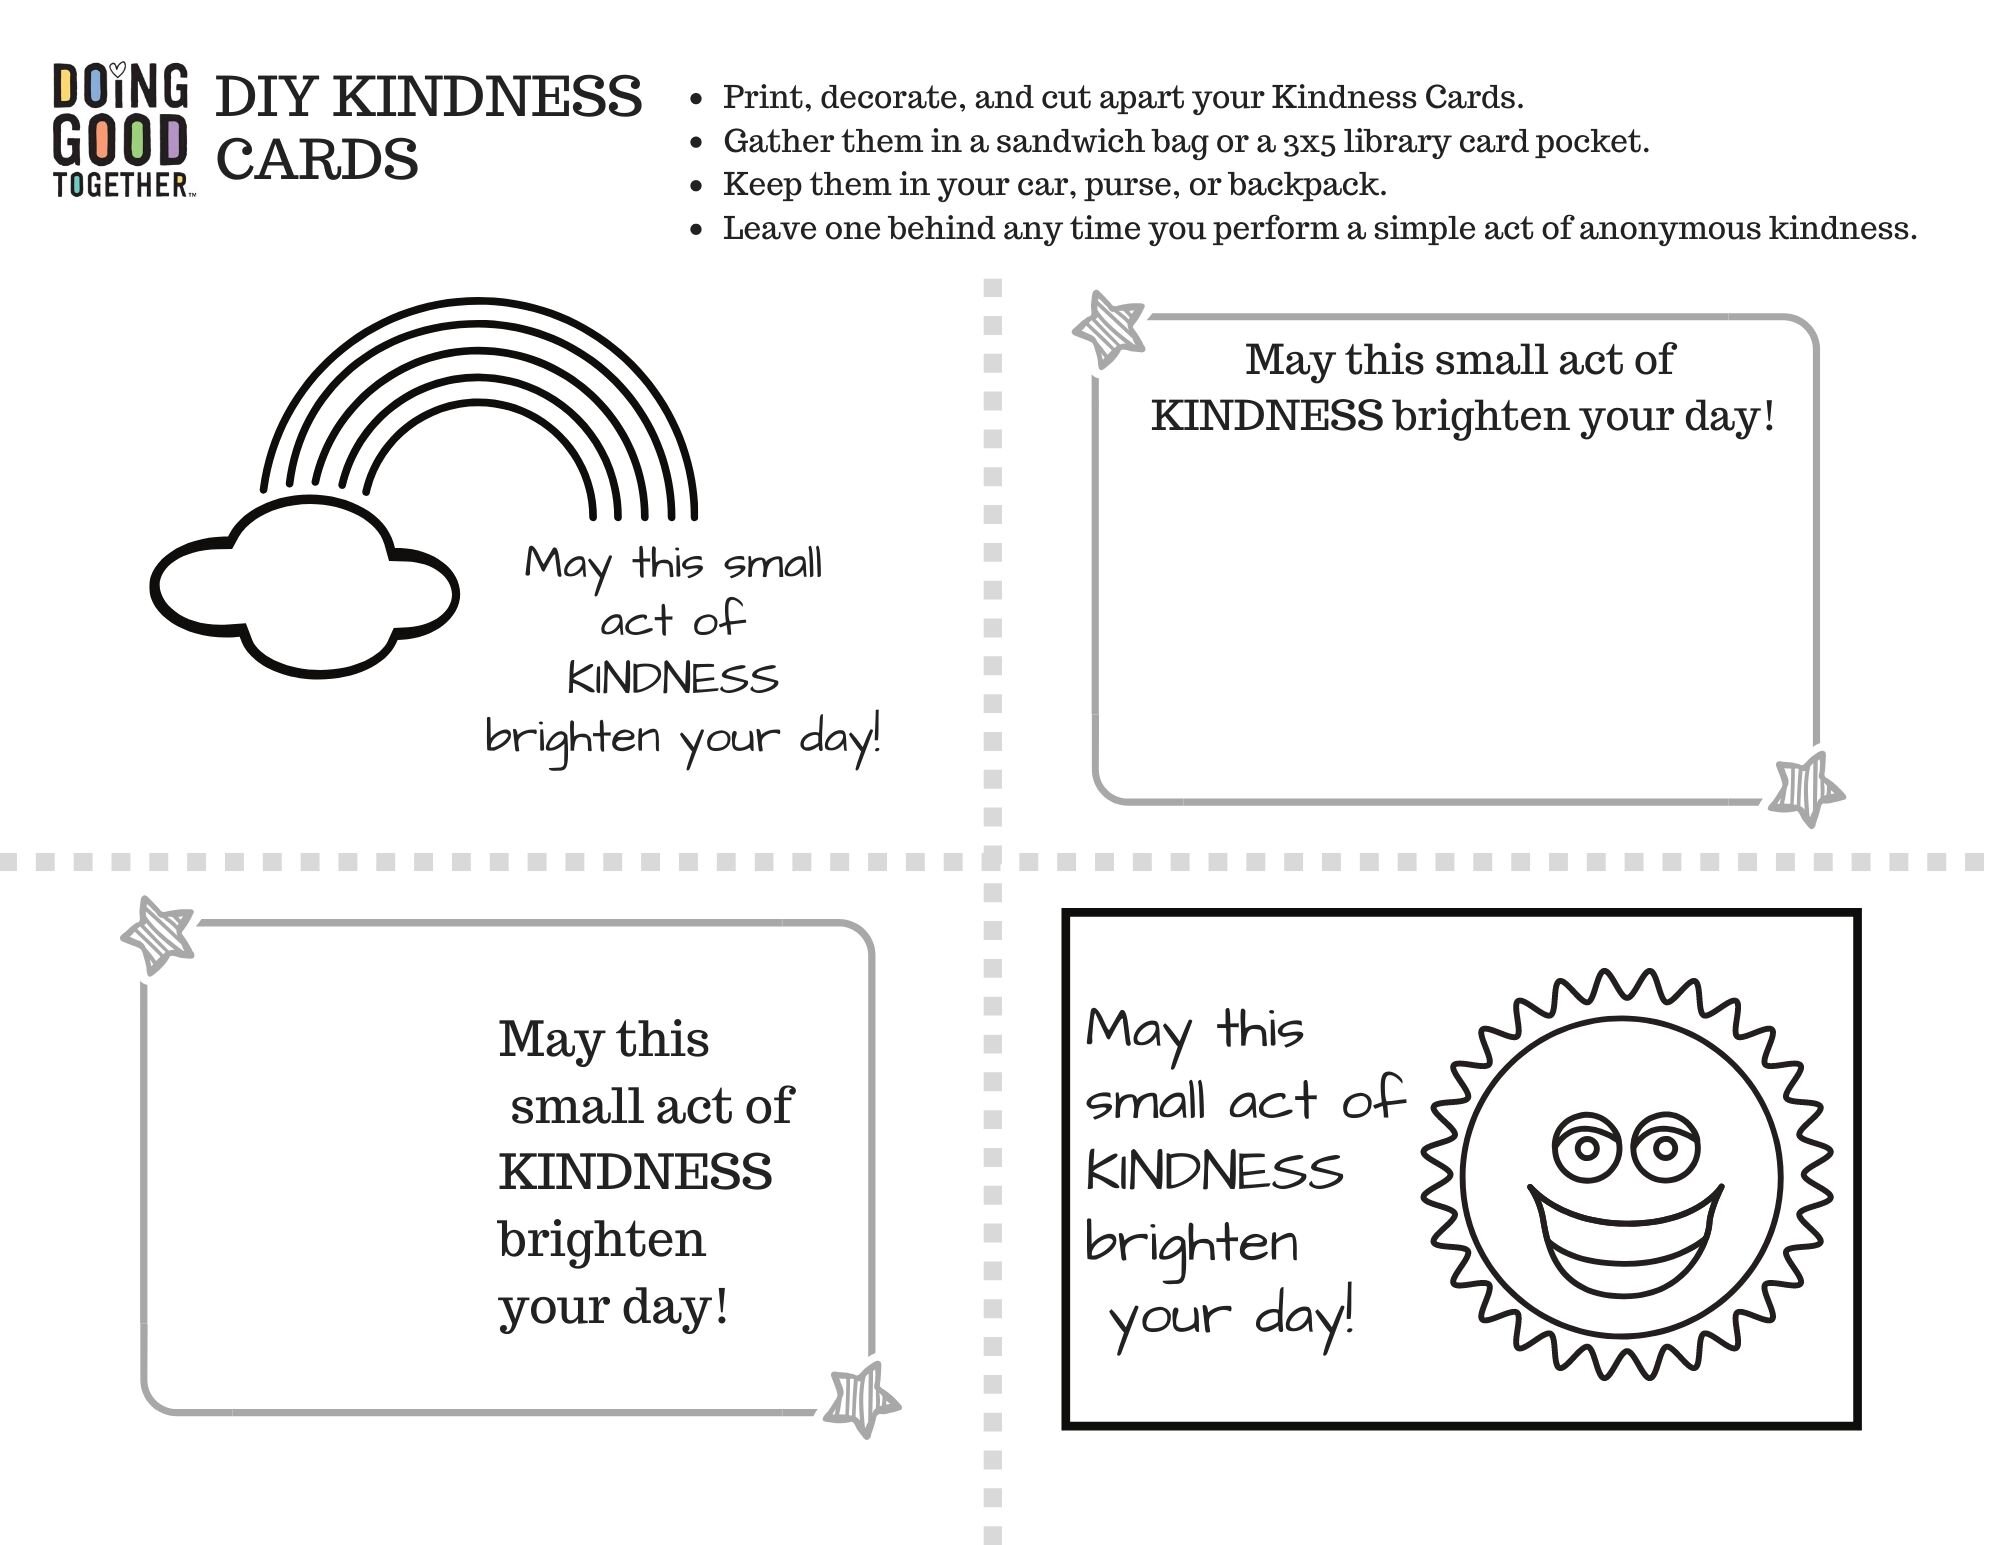 random-acts-of-kindness-cards-templates